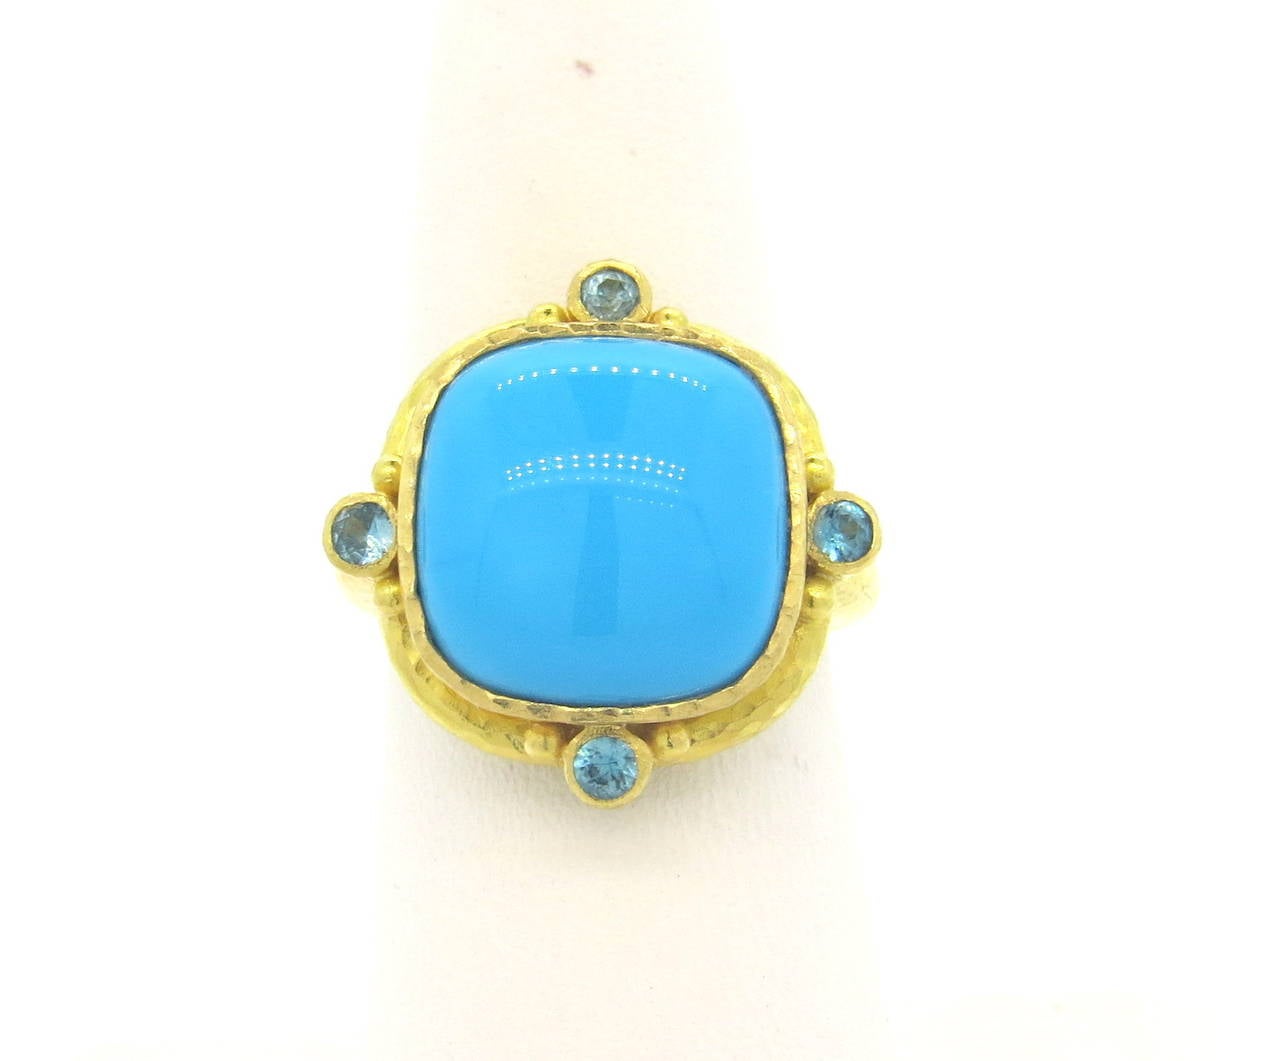 Elizabeth Locke signature 19k yellow gold ring, set with 13.8mm x 13.8mm turquoise, surrounded with four blue gemstones. Ring is a size 6 3/4, ring top is 21mm x 21mm. Marked 19k and with Locke hallmark. Weight of the piece - 13.4 grams